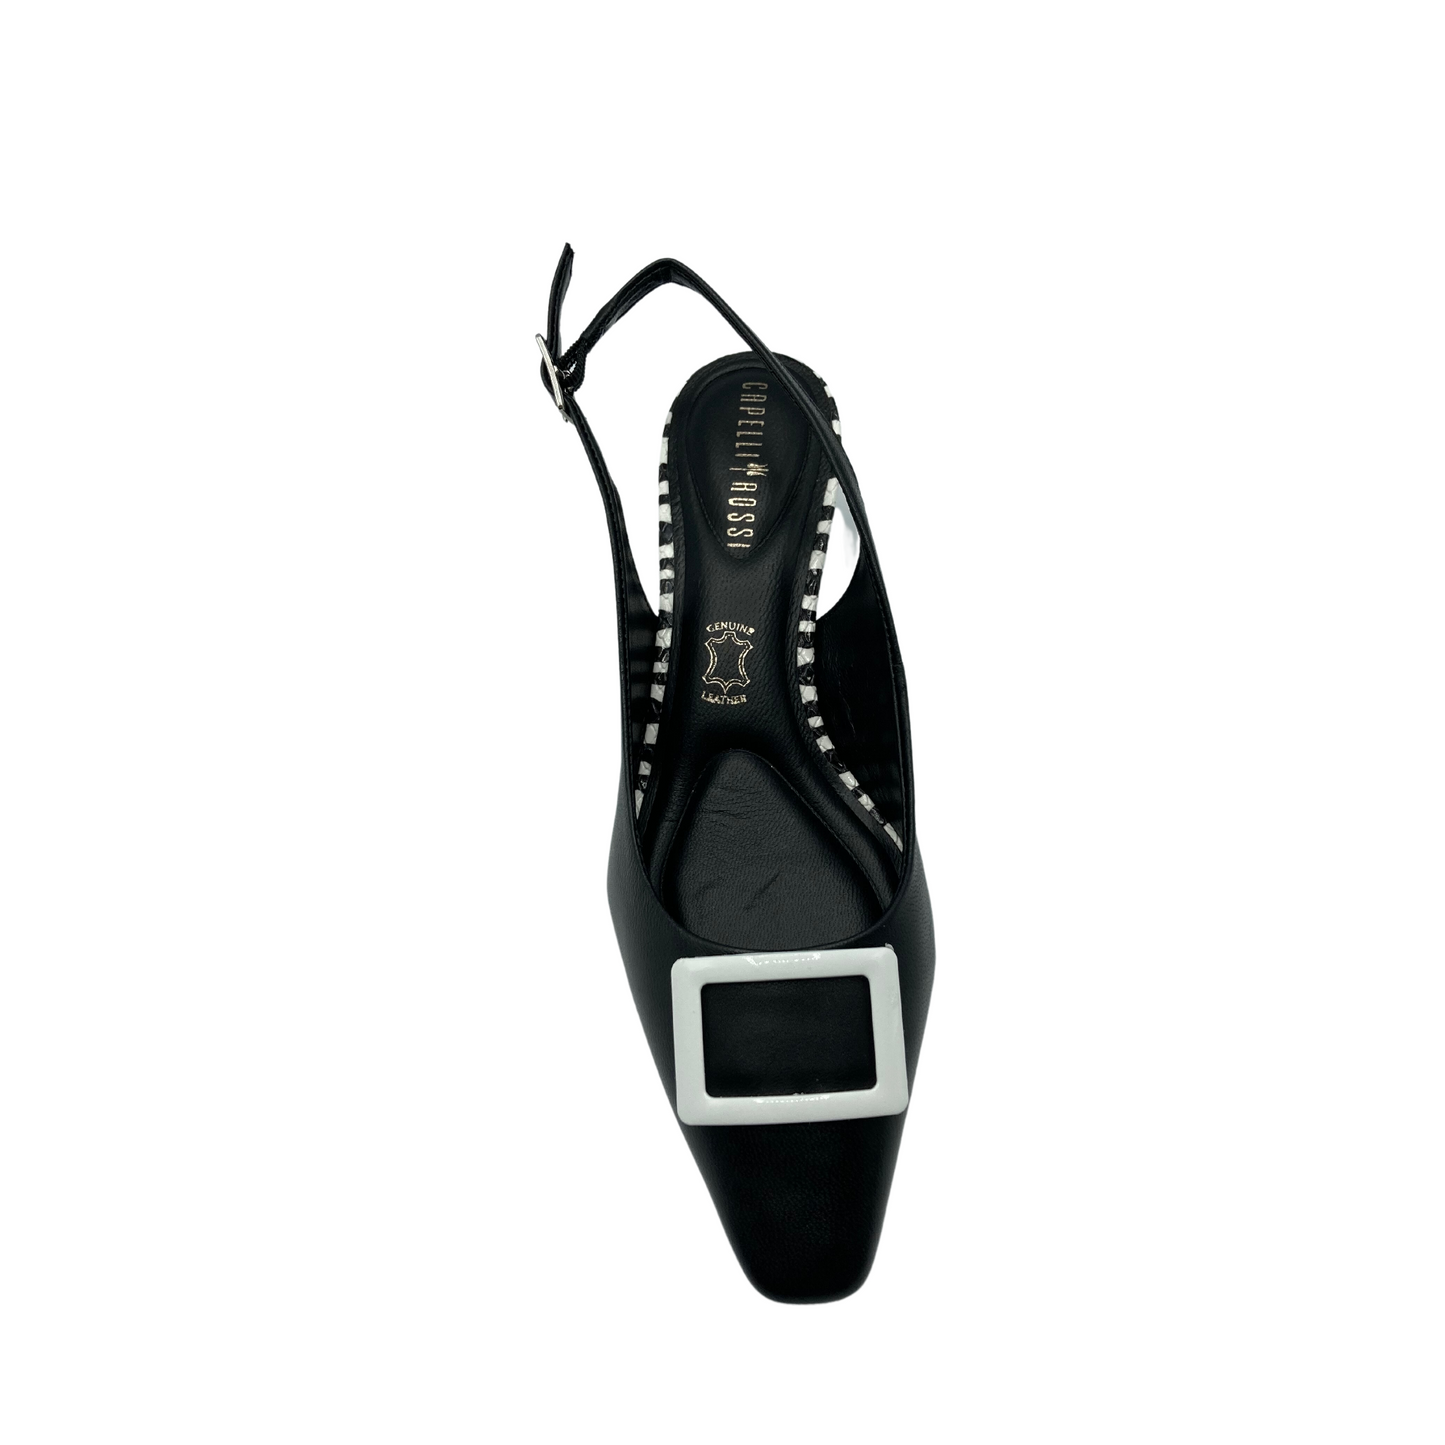 Top down view of a black slingback shoe with white buckle detail at the front.  Adjustable buckle at heel strap.  Zebra trim detail around footbed